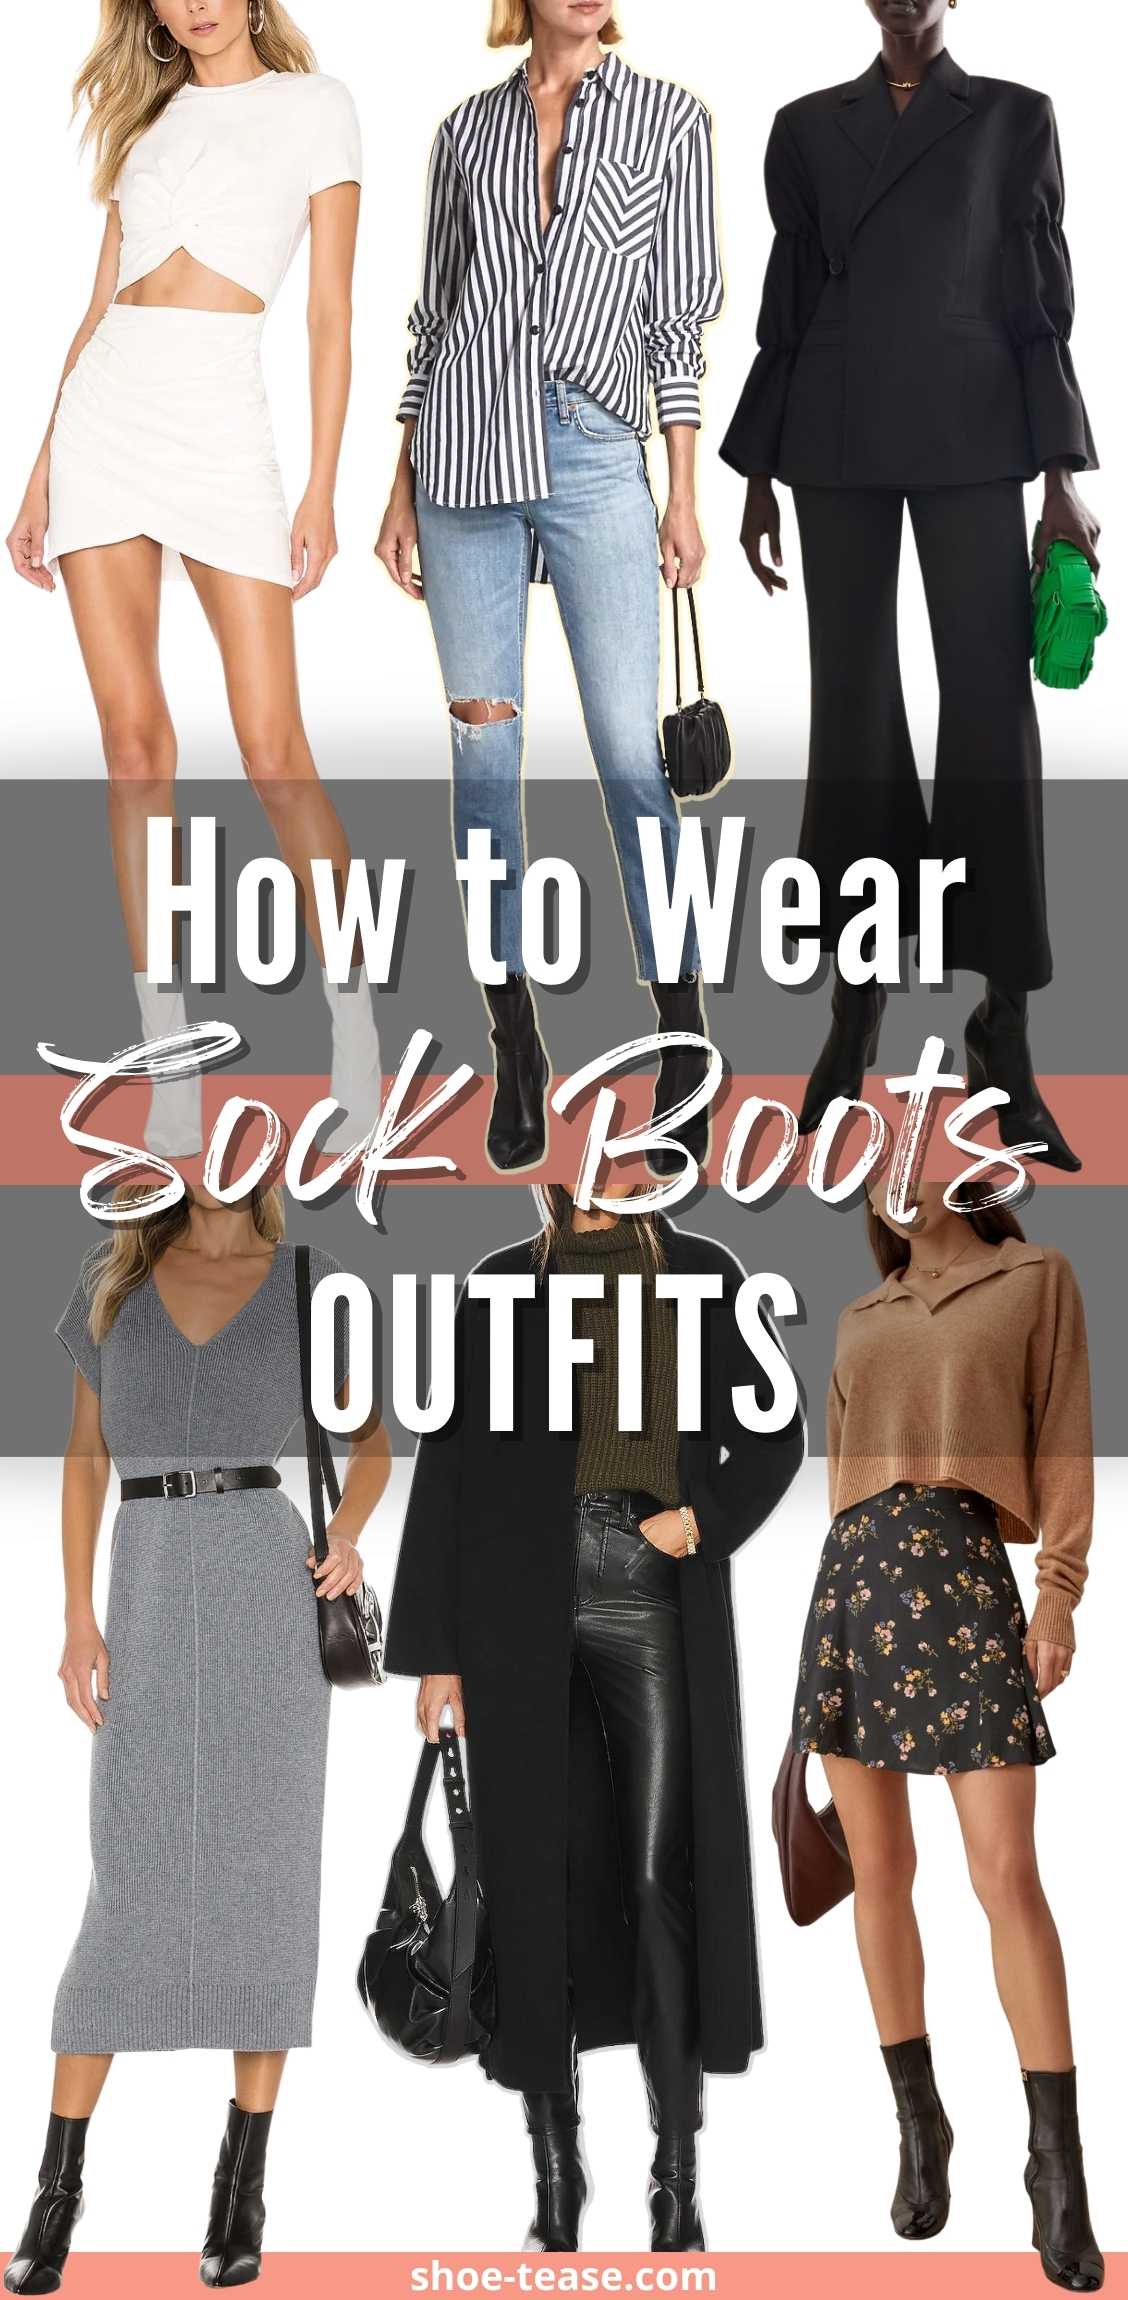 How to Wear Sock Boots Outfits - 25 Sock Bootie Outfit Ideas